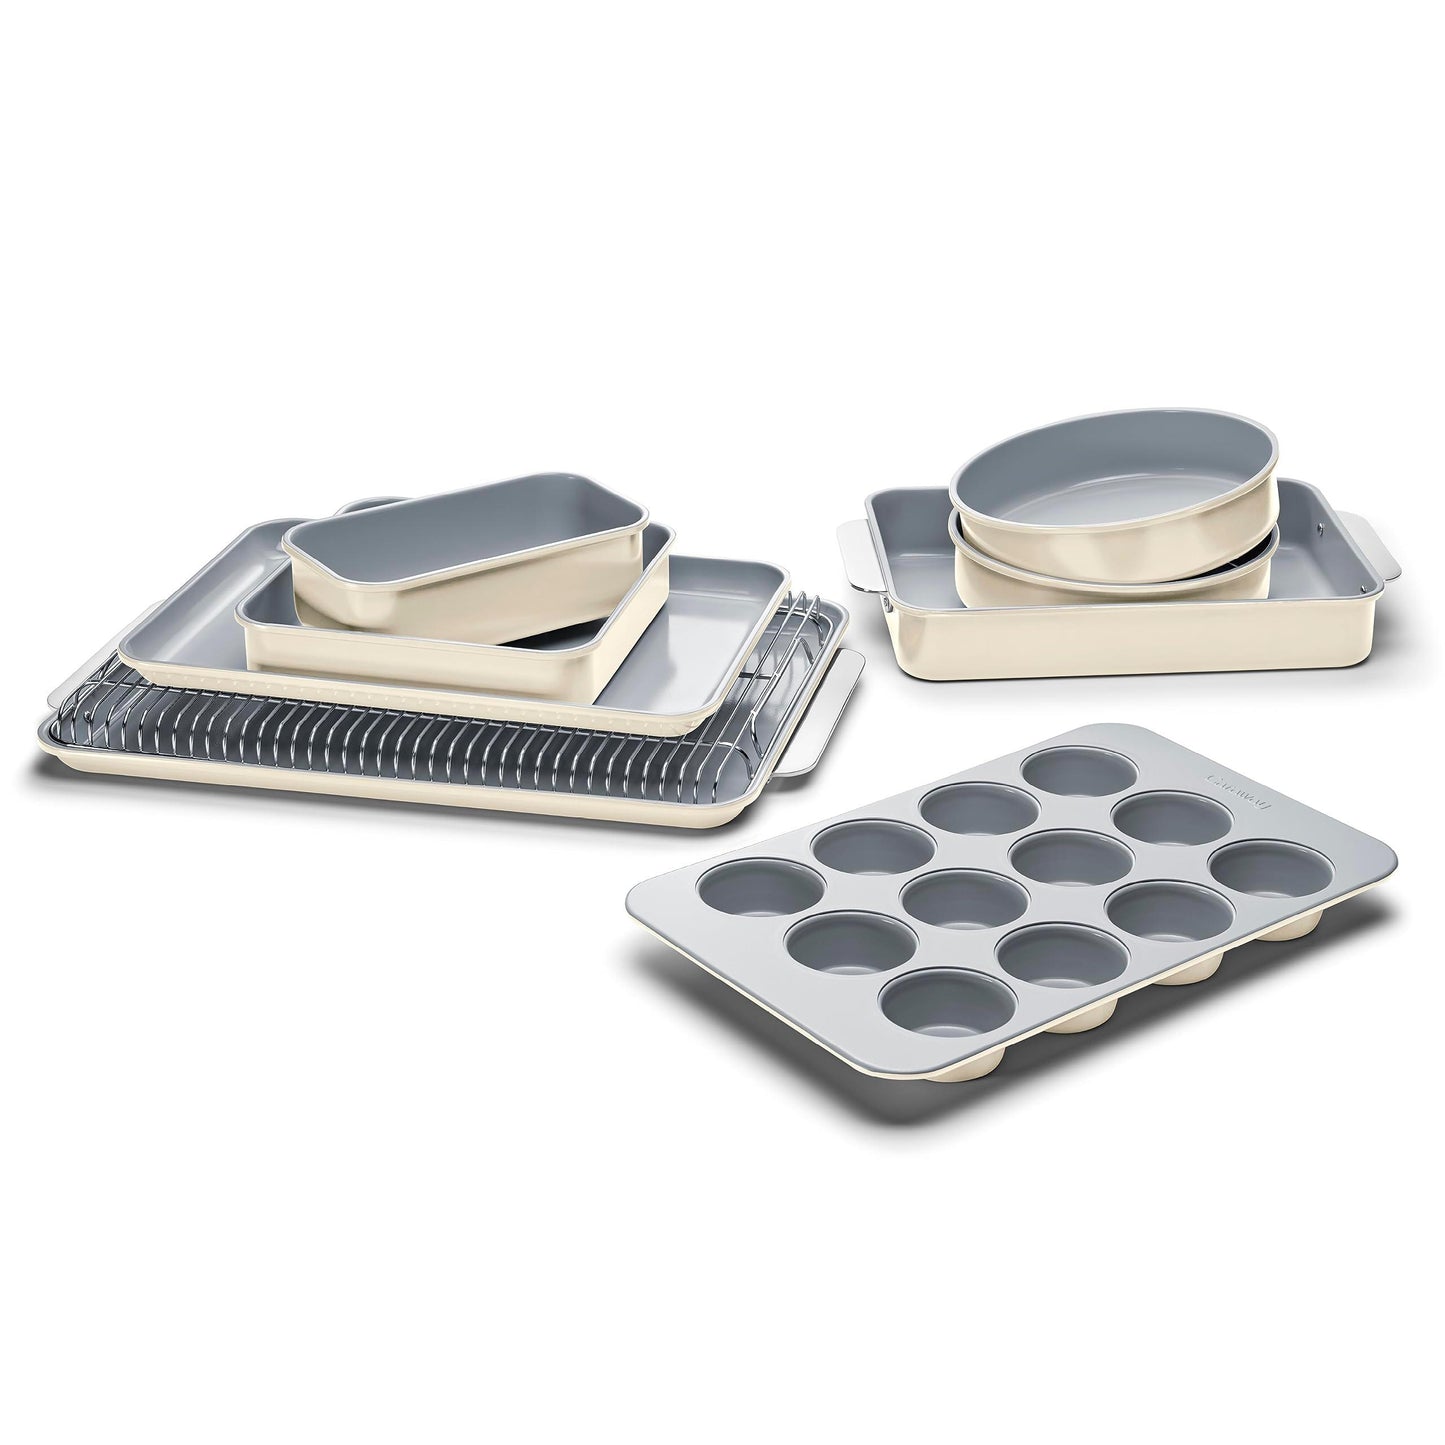 Caraway Nonstick Ceramic Bakeware Set (11 Pieces) - Baking Sheets, Assorted Baking Pans, Cooling Rack, & Storage - Aluminized Steel Body - Non Toxic, PTFE & PFOA Free - Cream - CookCave